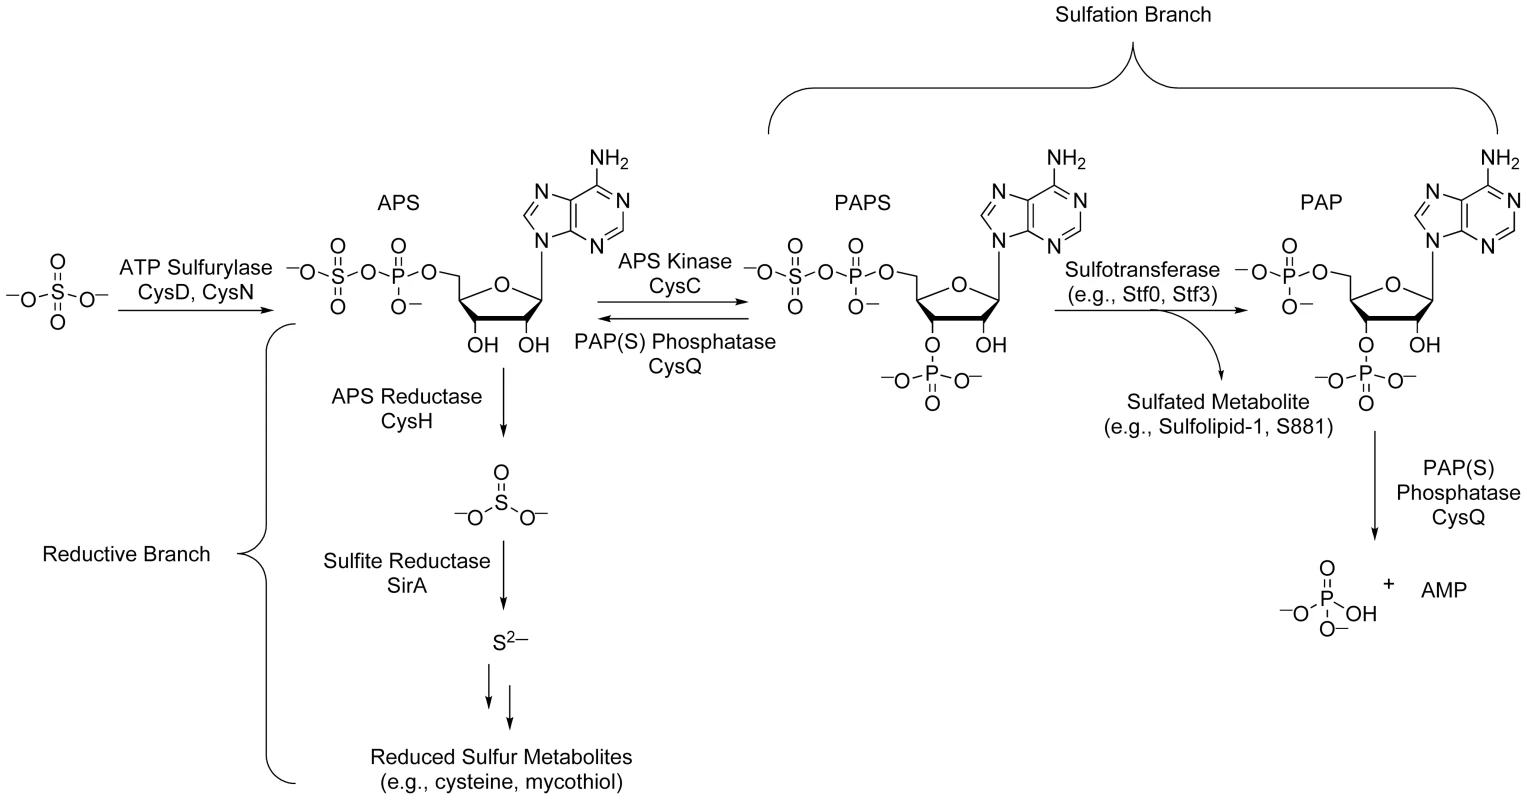 The sulfate assimilation pathway of <i>Mtb</i>.